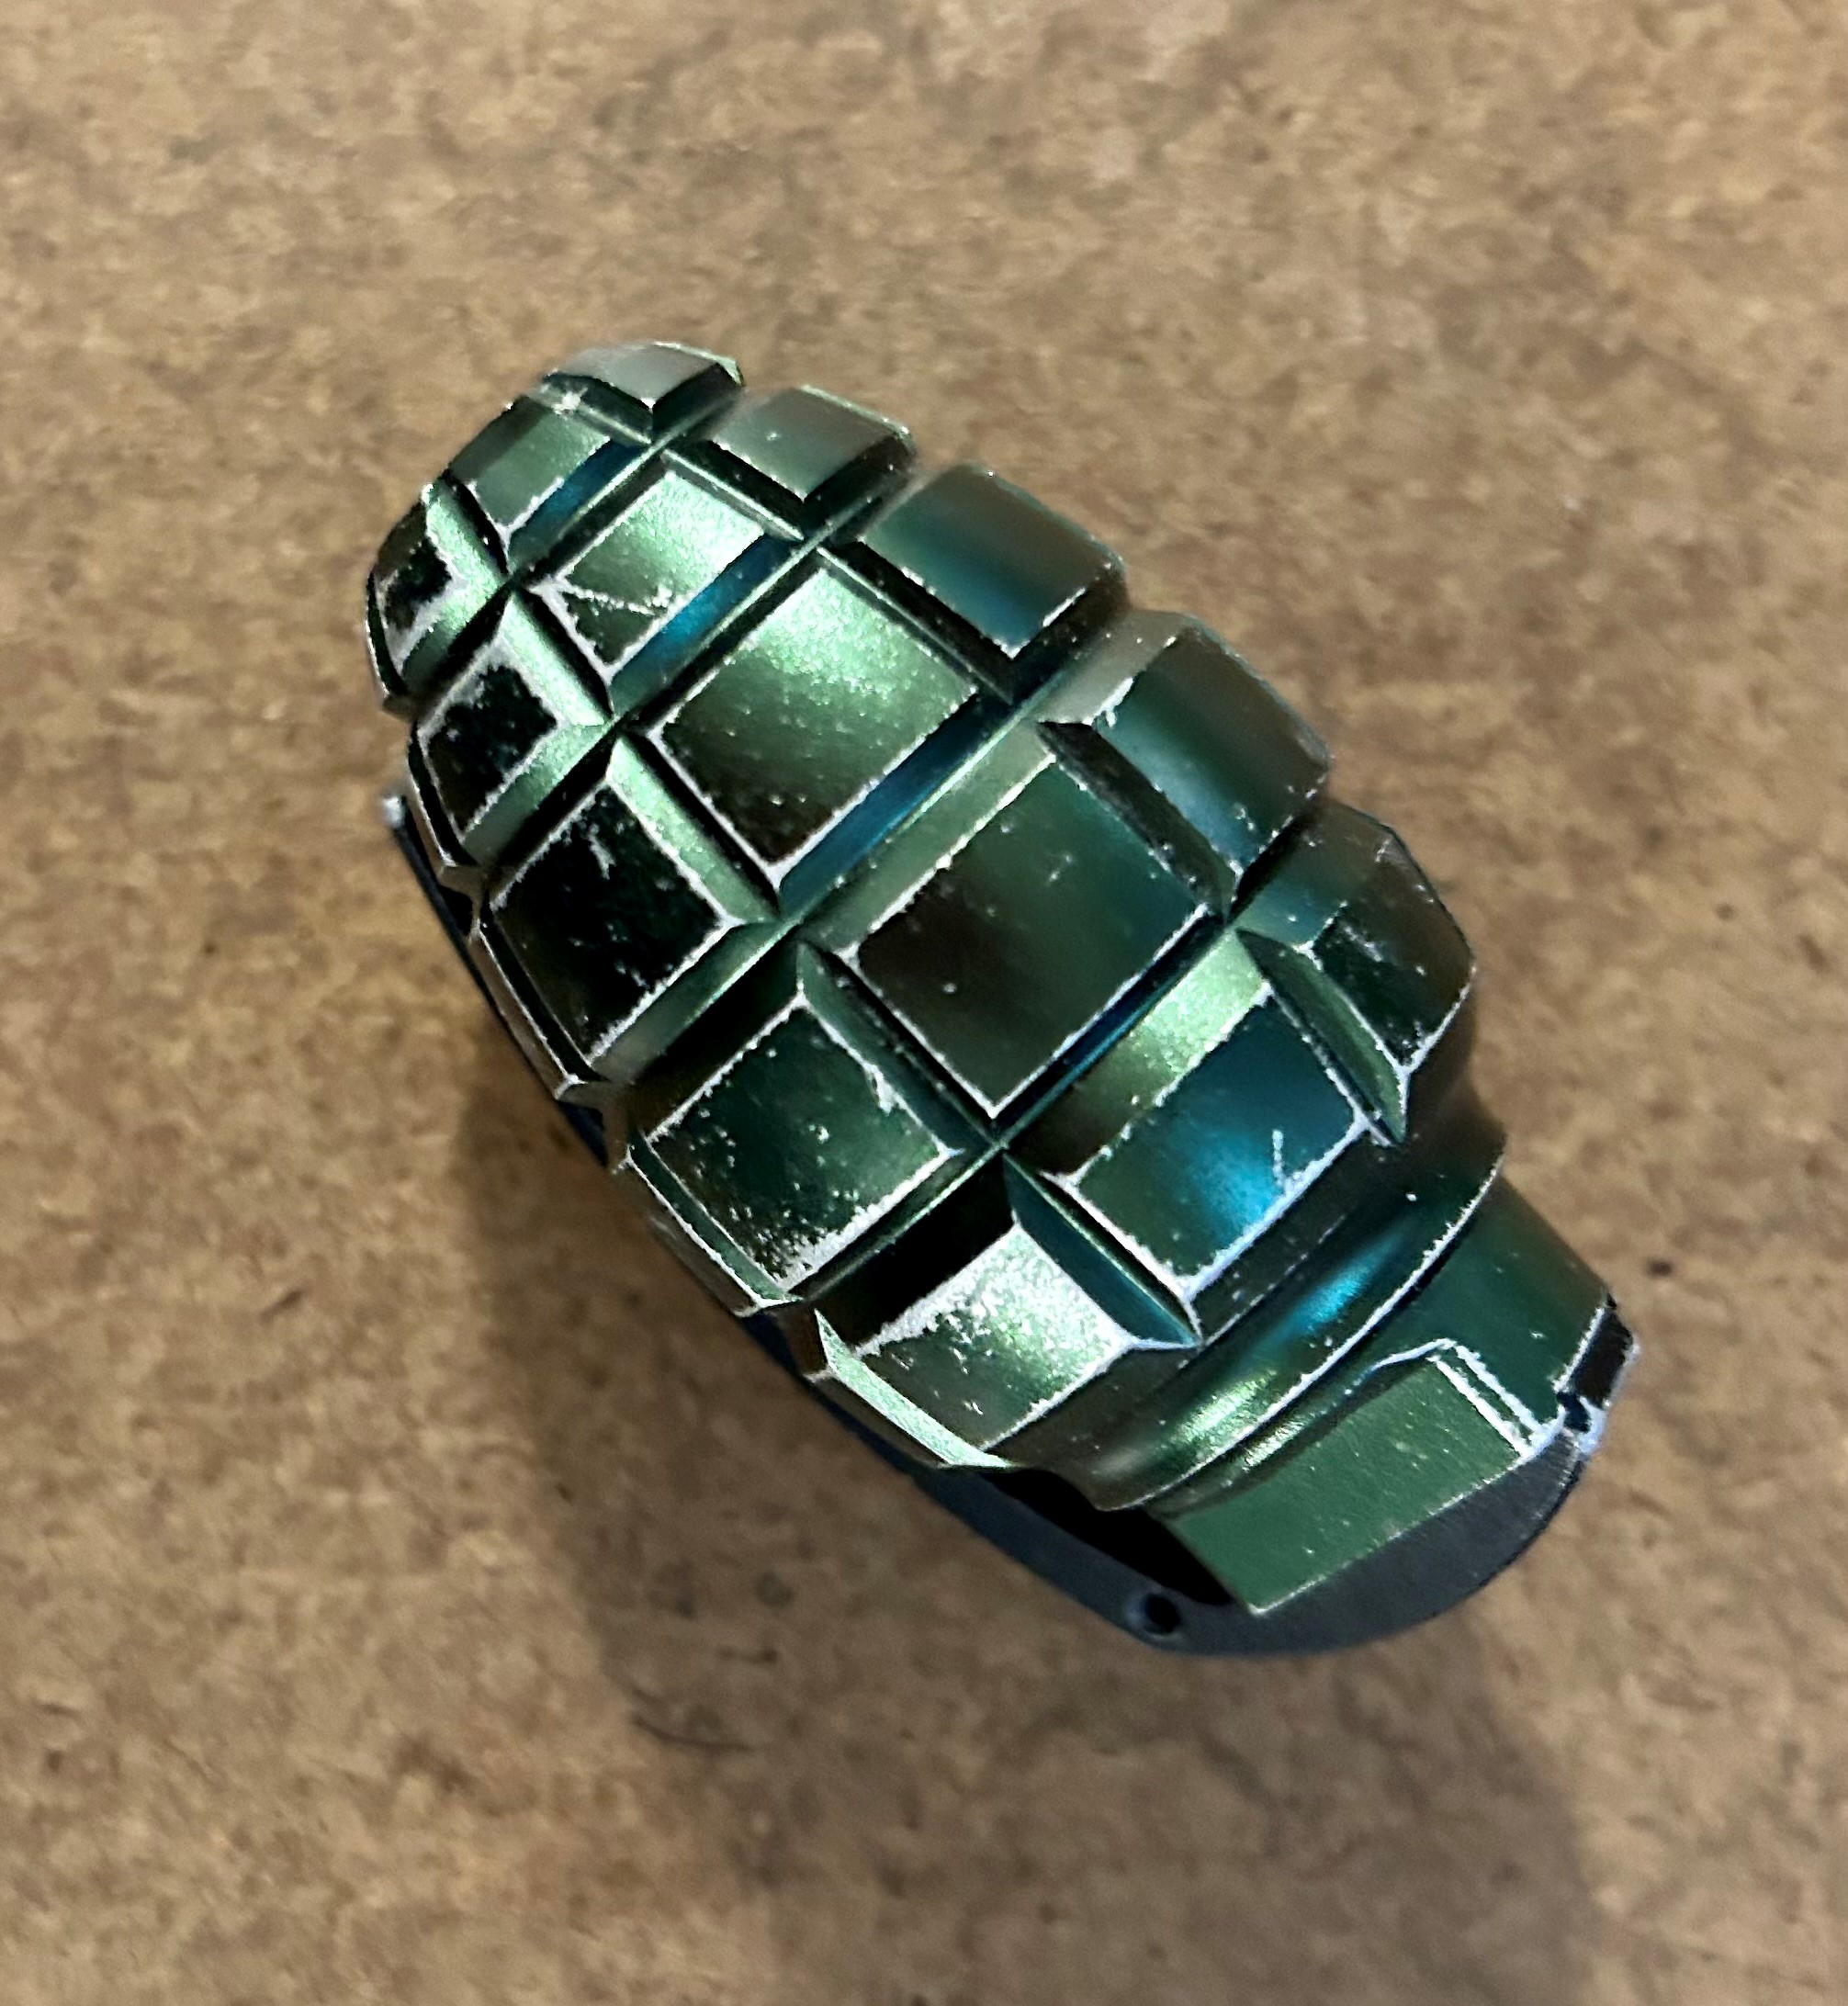 This replica hand grenade was removed from a carry-on bag at Frederick Douglass Greater Rochester International Airport. (TSA photo)